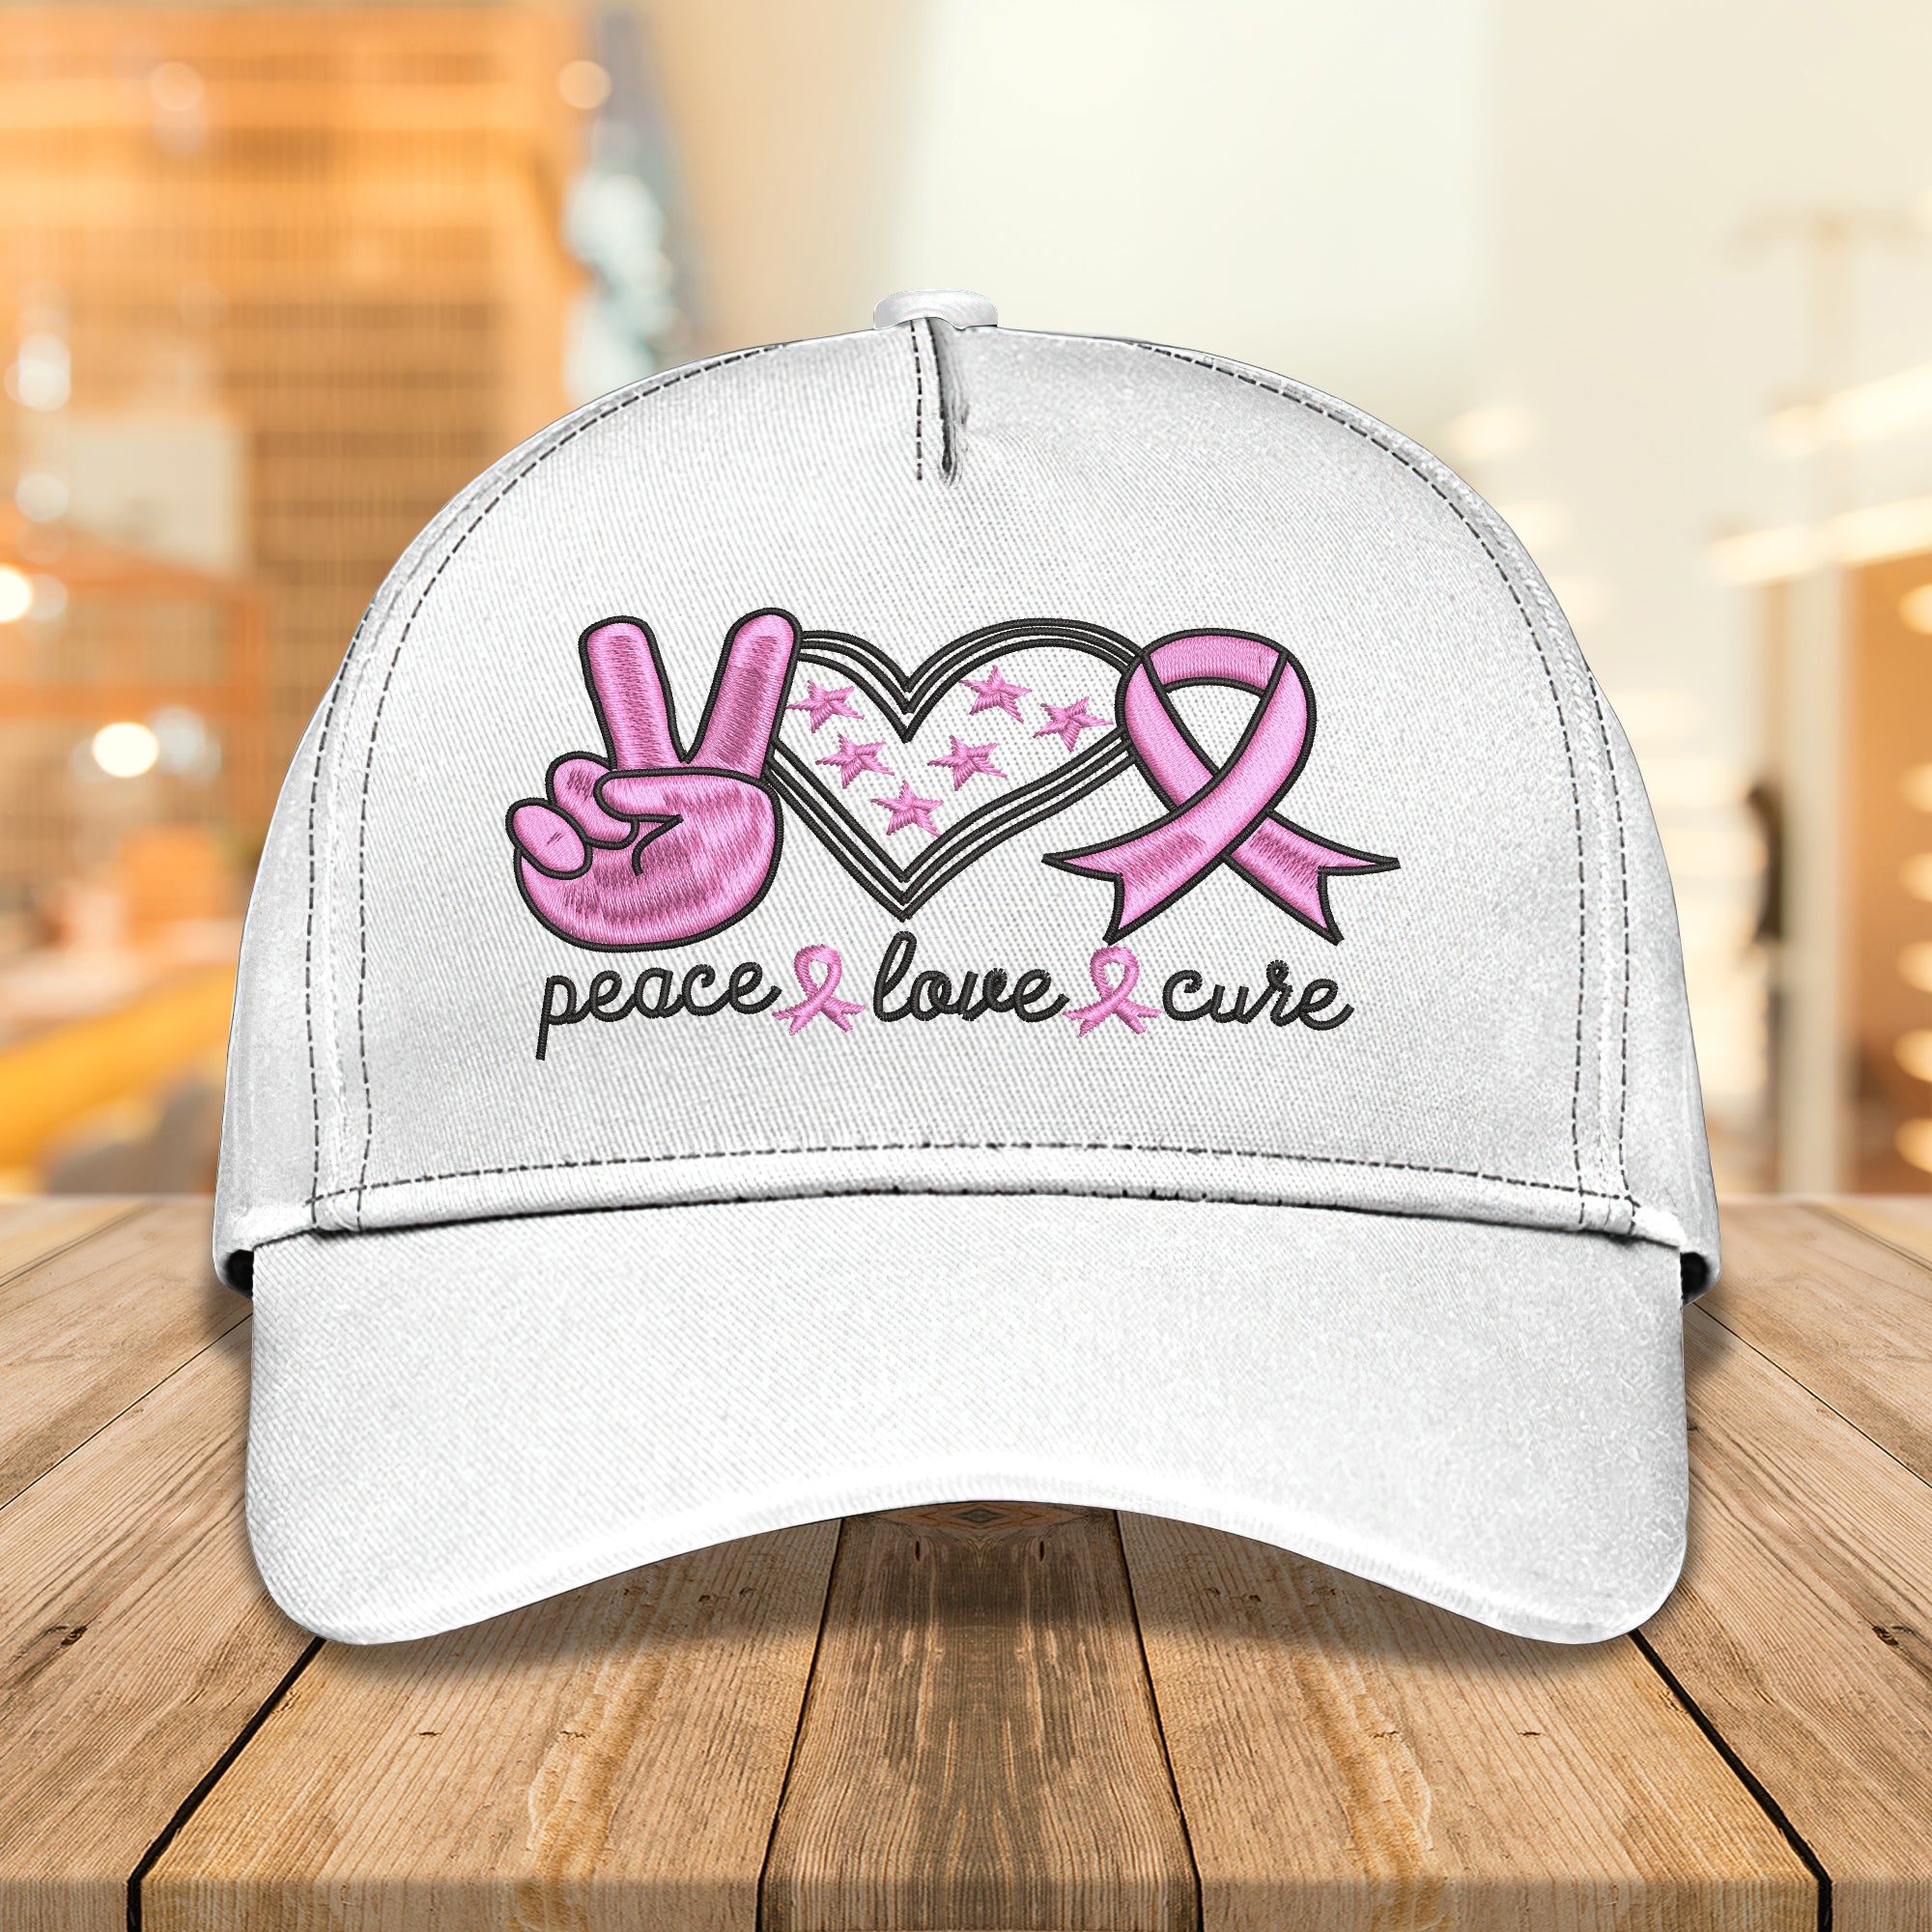 Cancer Embroidered Baseball Caps